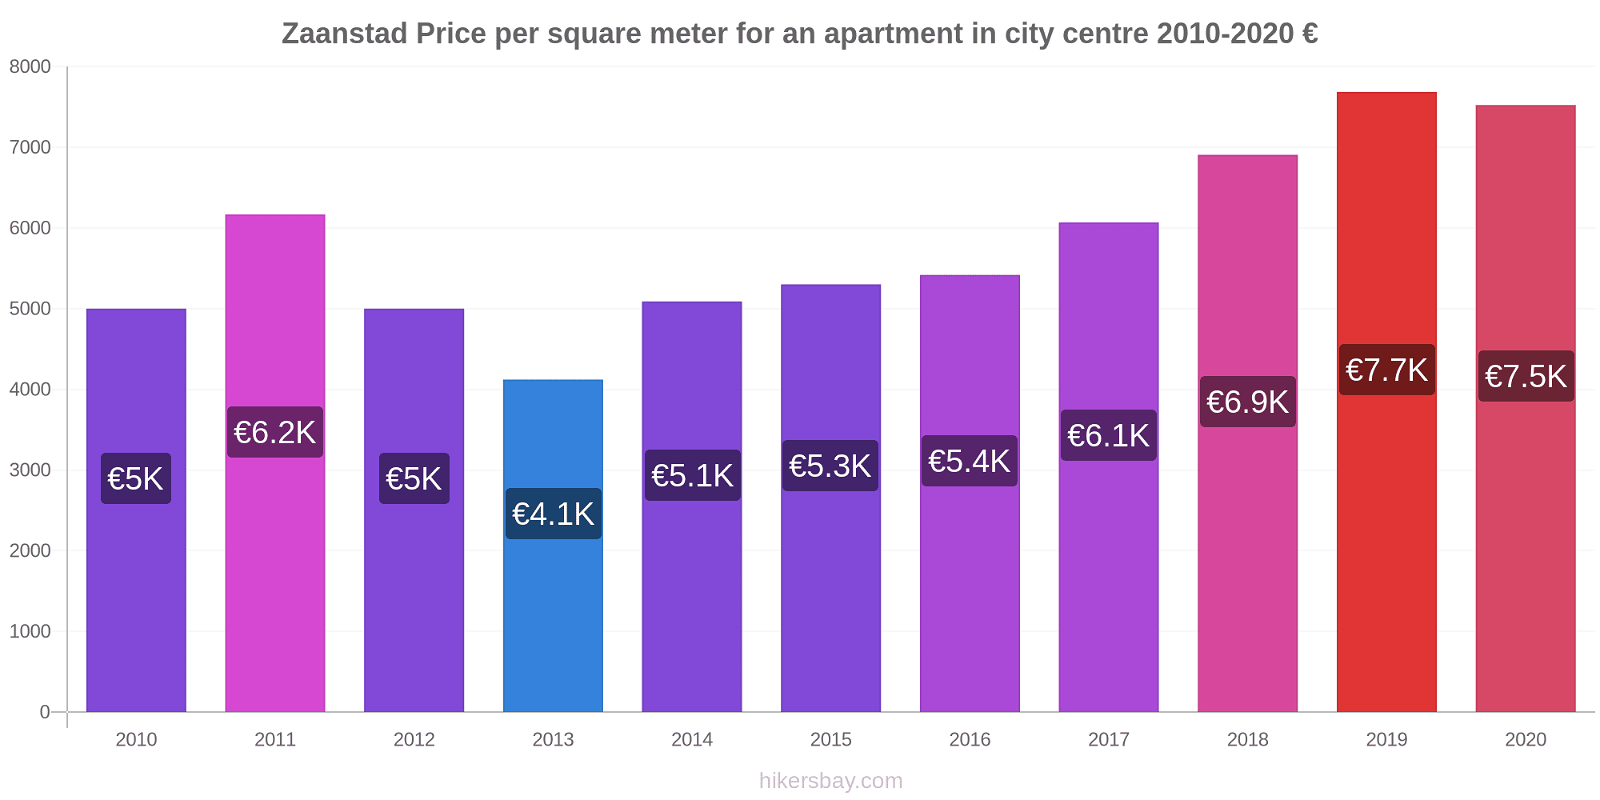 Zaanstad price changes Price per square meter for an apartment in city centre hikersbay.com